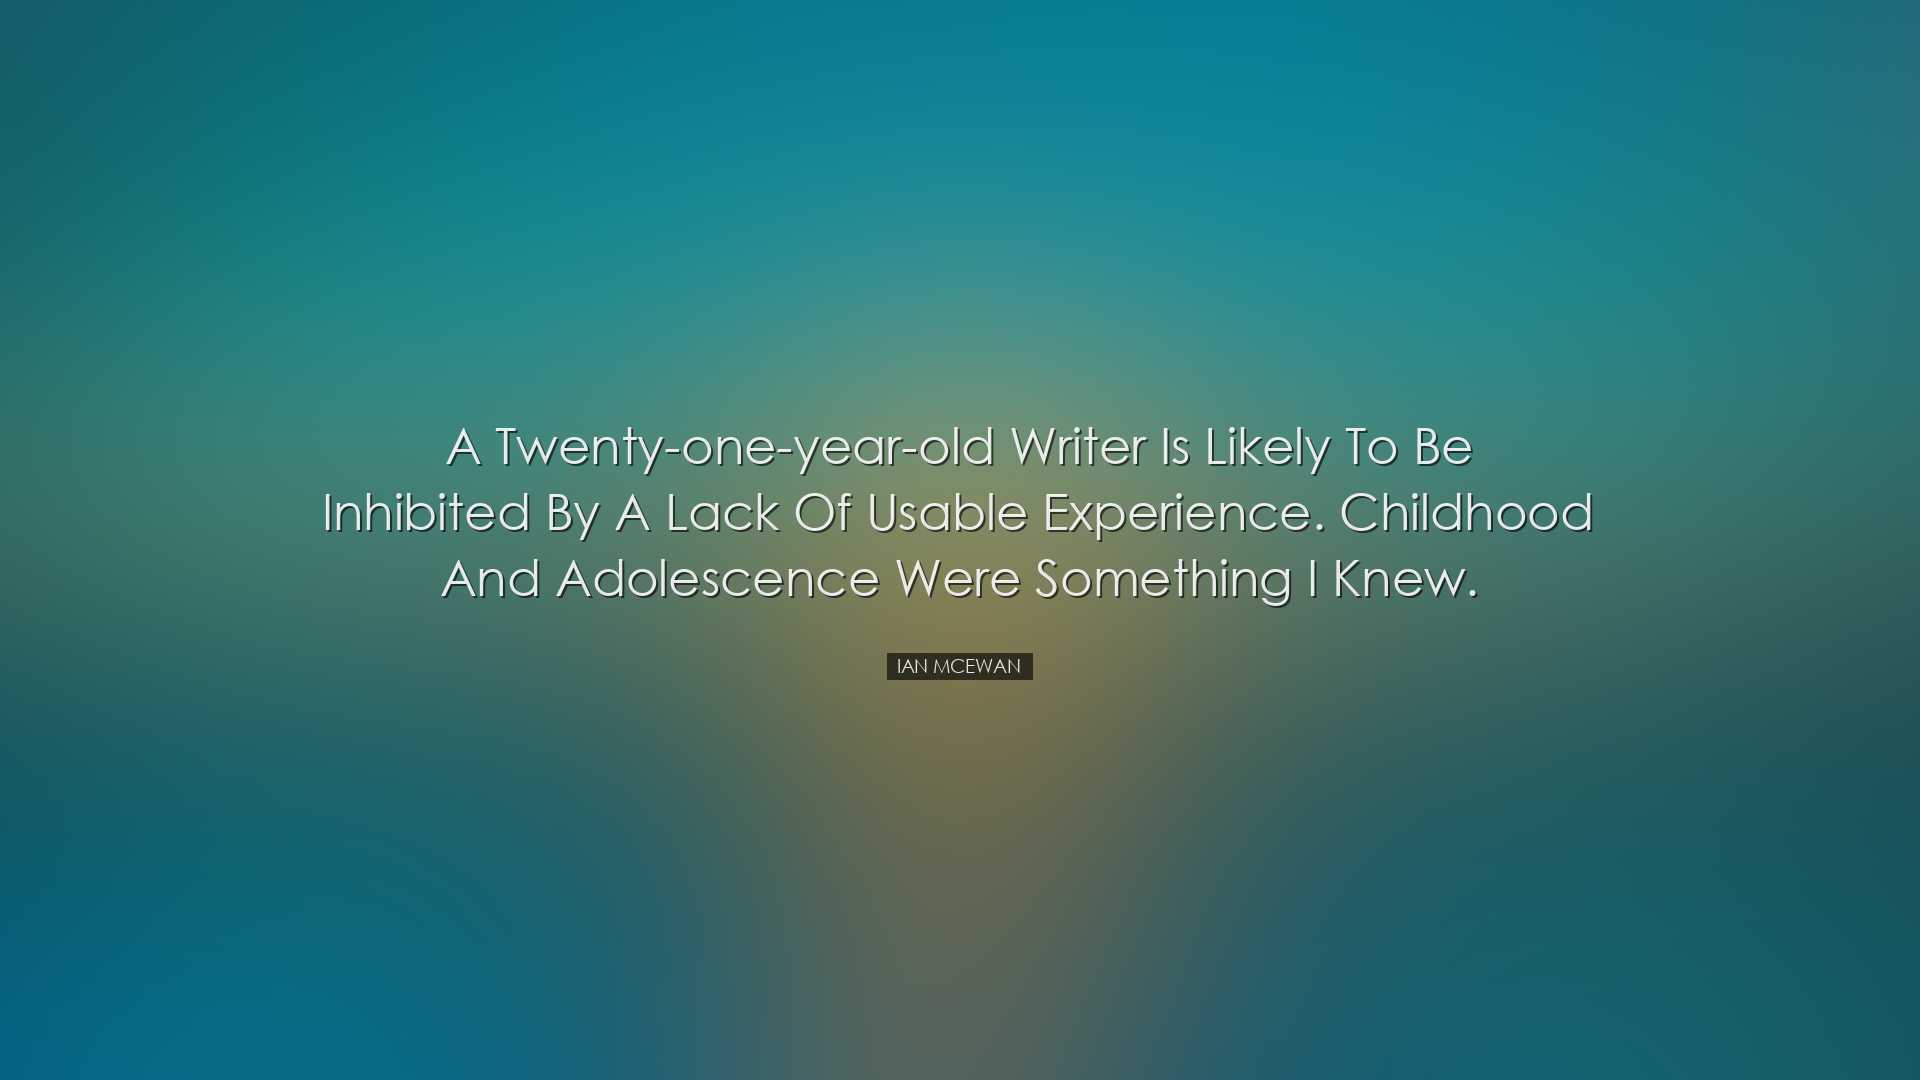 A twenty-one-year-old writer is likely to be inhibited by a lack o